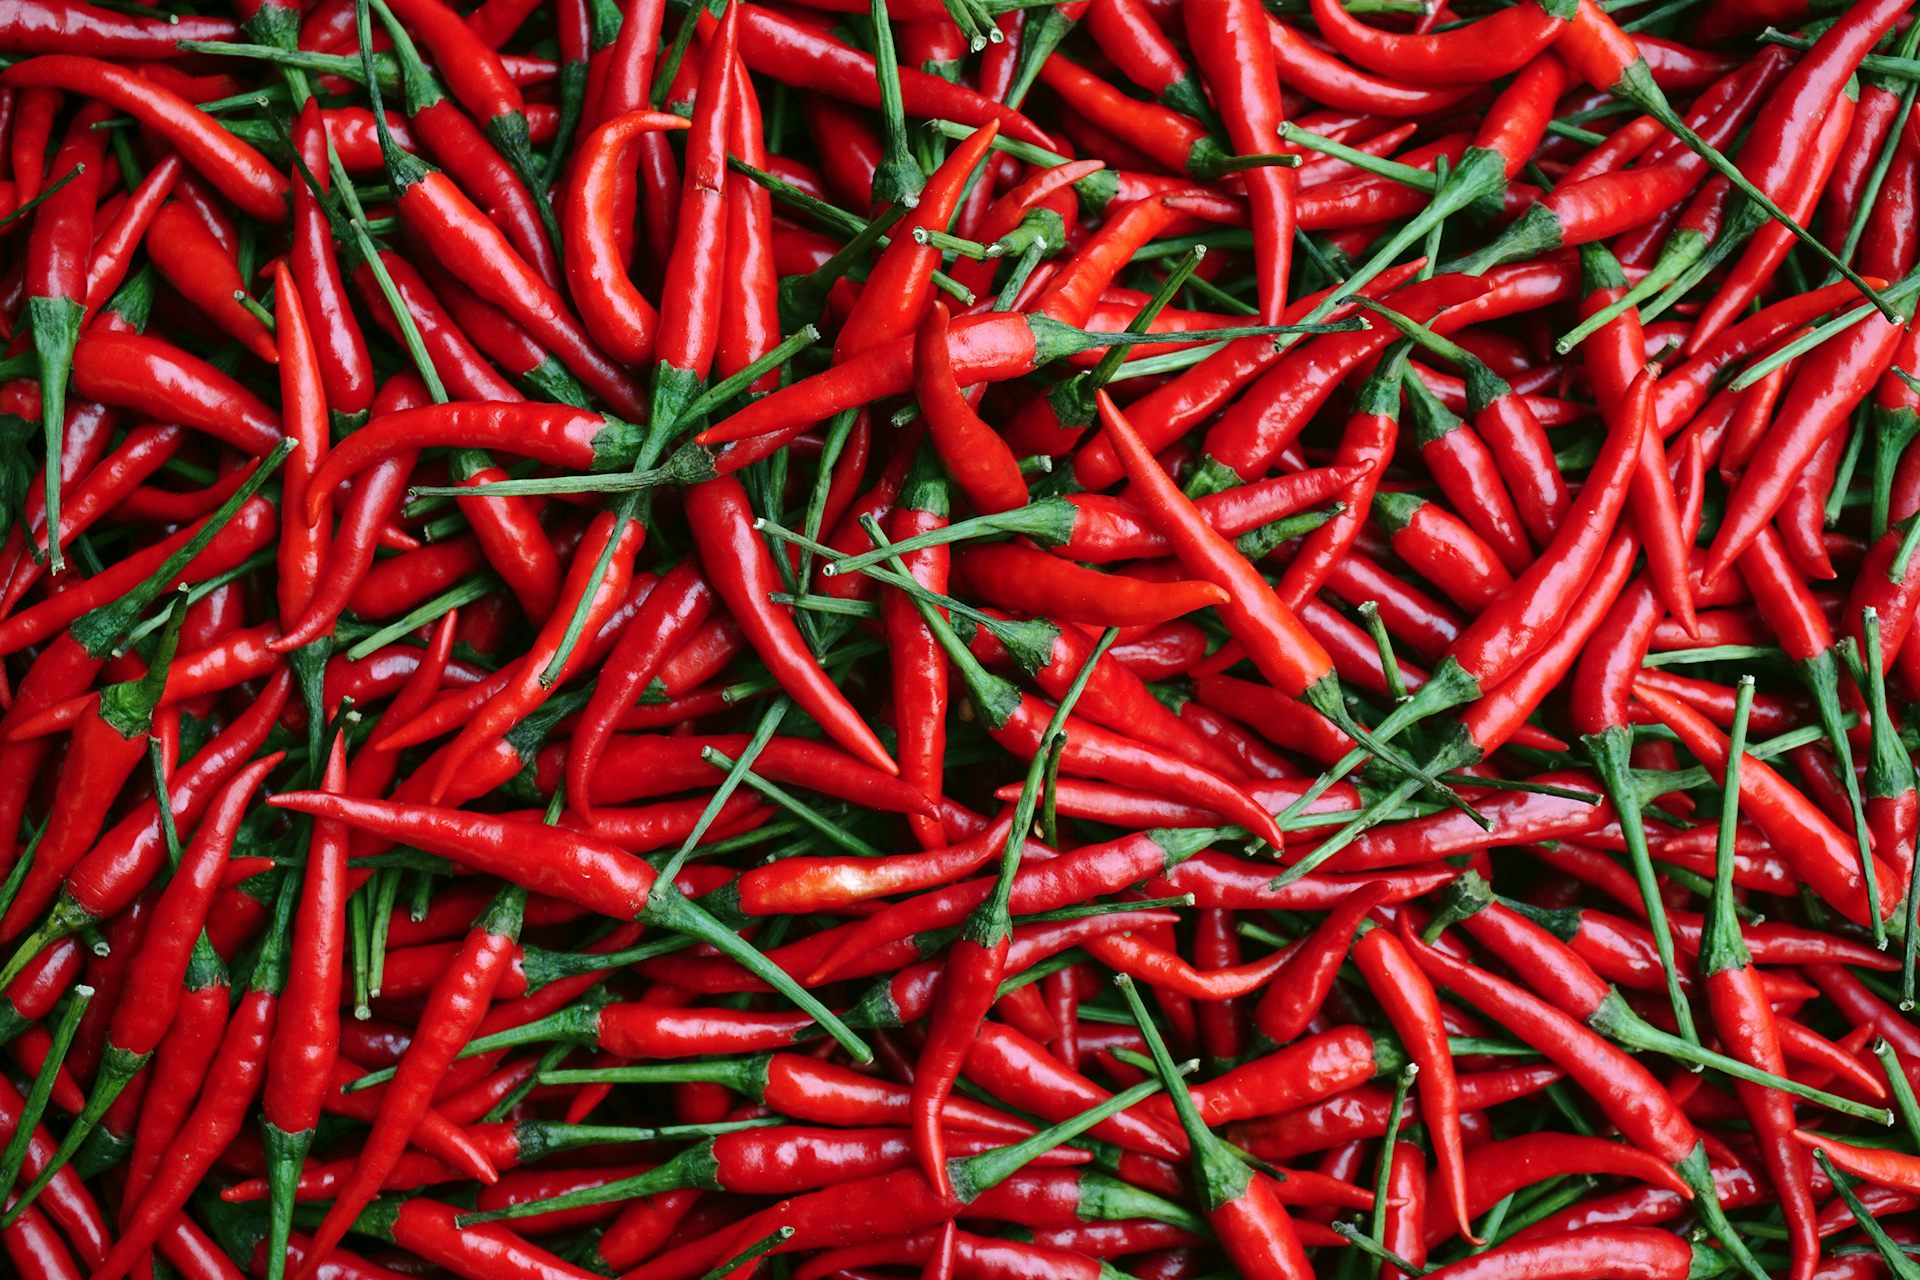 Can eating hot chilli peppers actually hurt you?